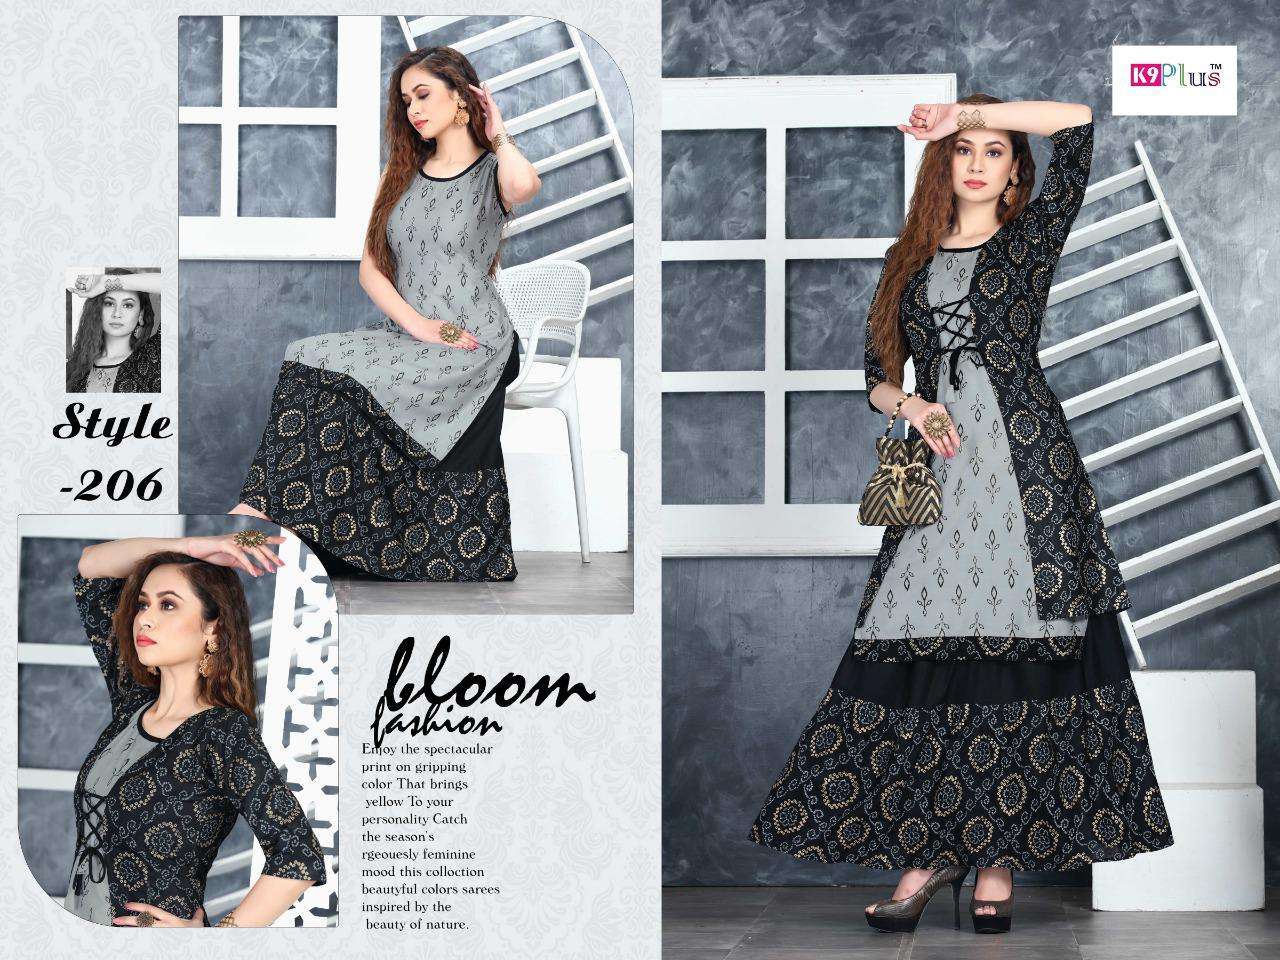 HELLO JACKET BY K9 PLUS 201 TO 208 SERIES DESIGNER STYLISH FANCY COLORFUL BEAUTIFUL PARTY WEAR & ETHNIC WEAR COLLECTION HEAVY RAYON KURTIS WITH BOTTOM AT WHOLESALE PRICE